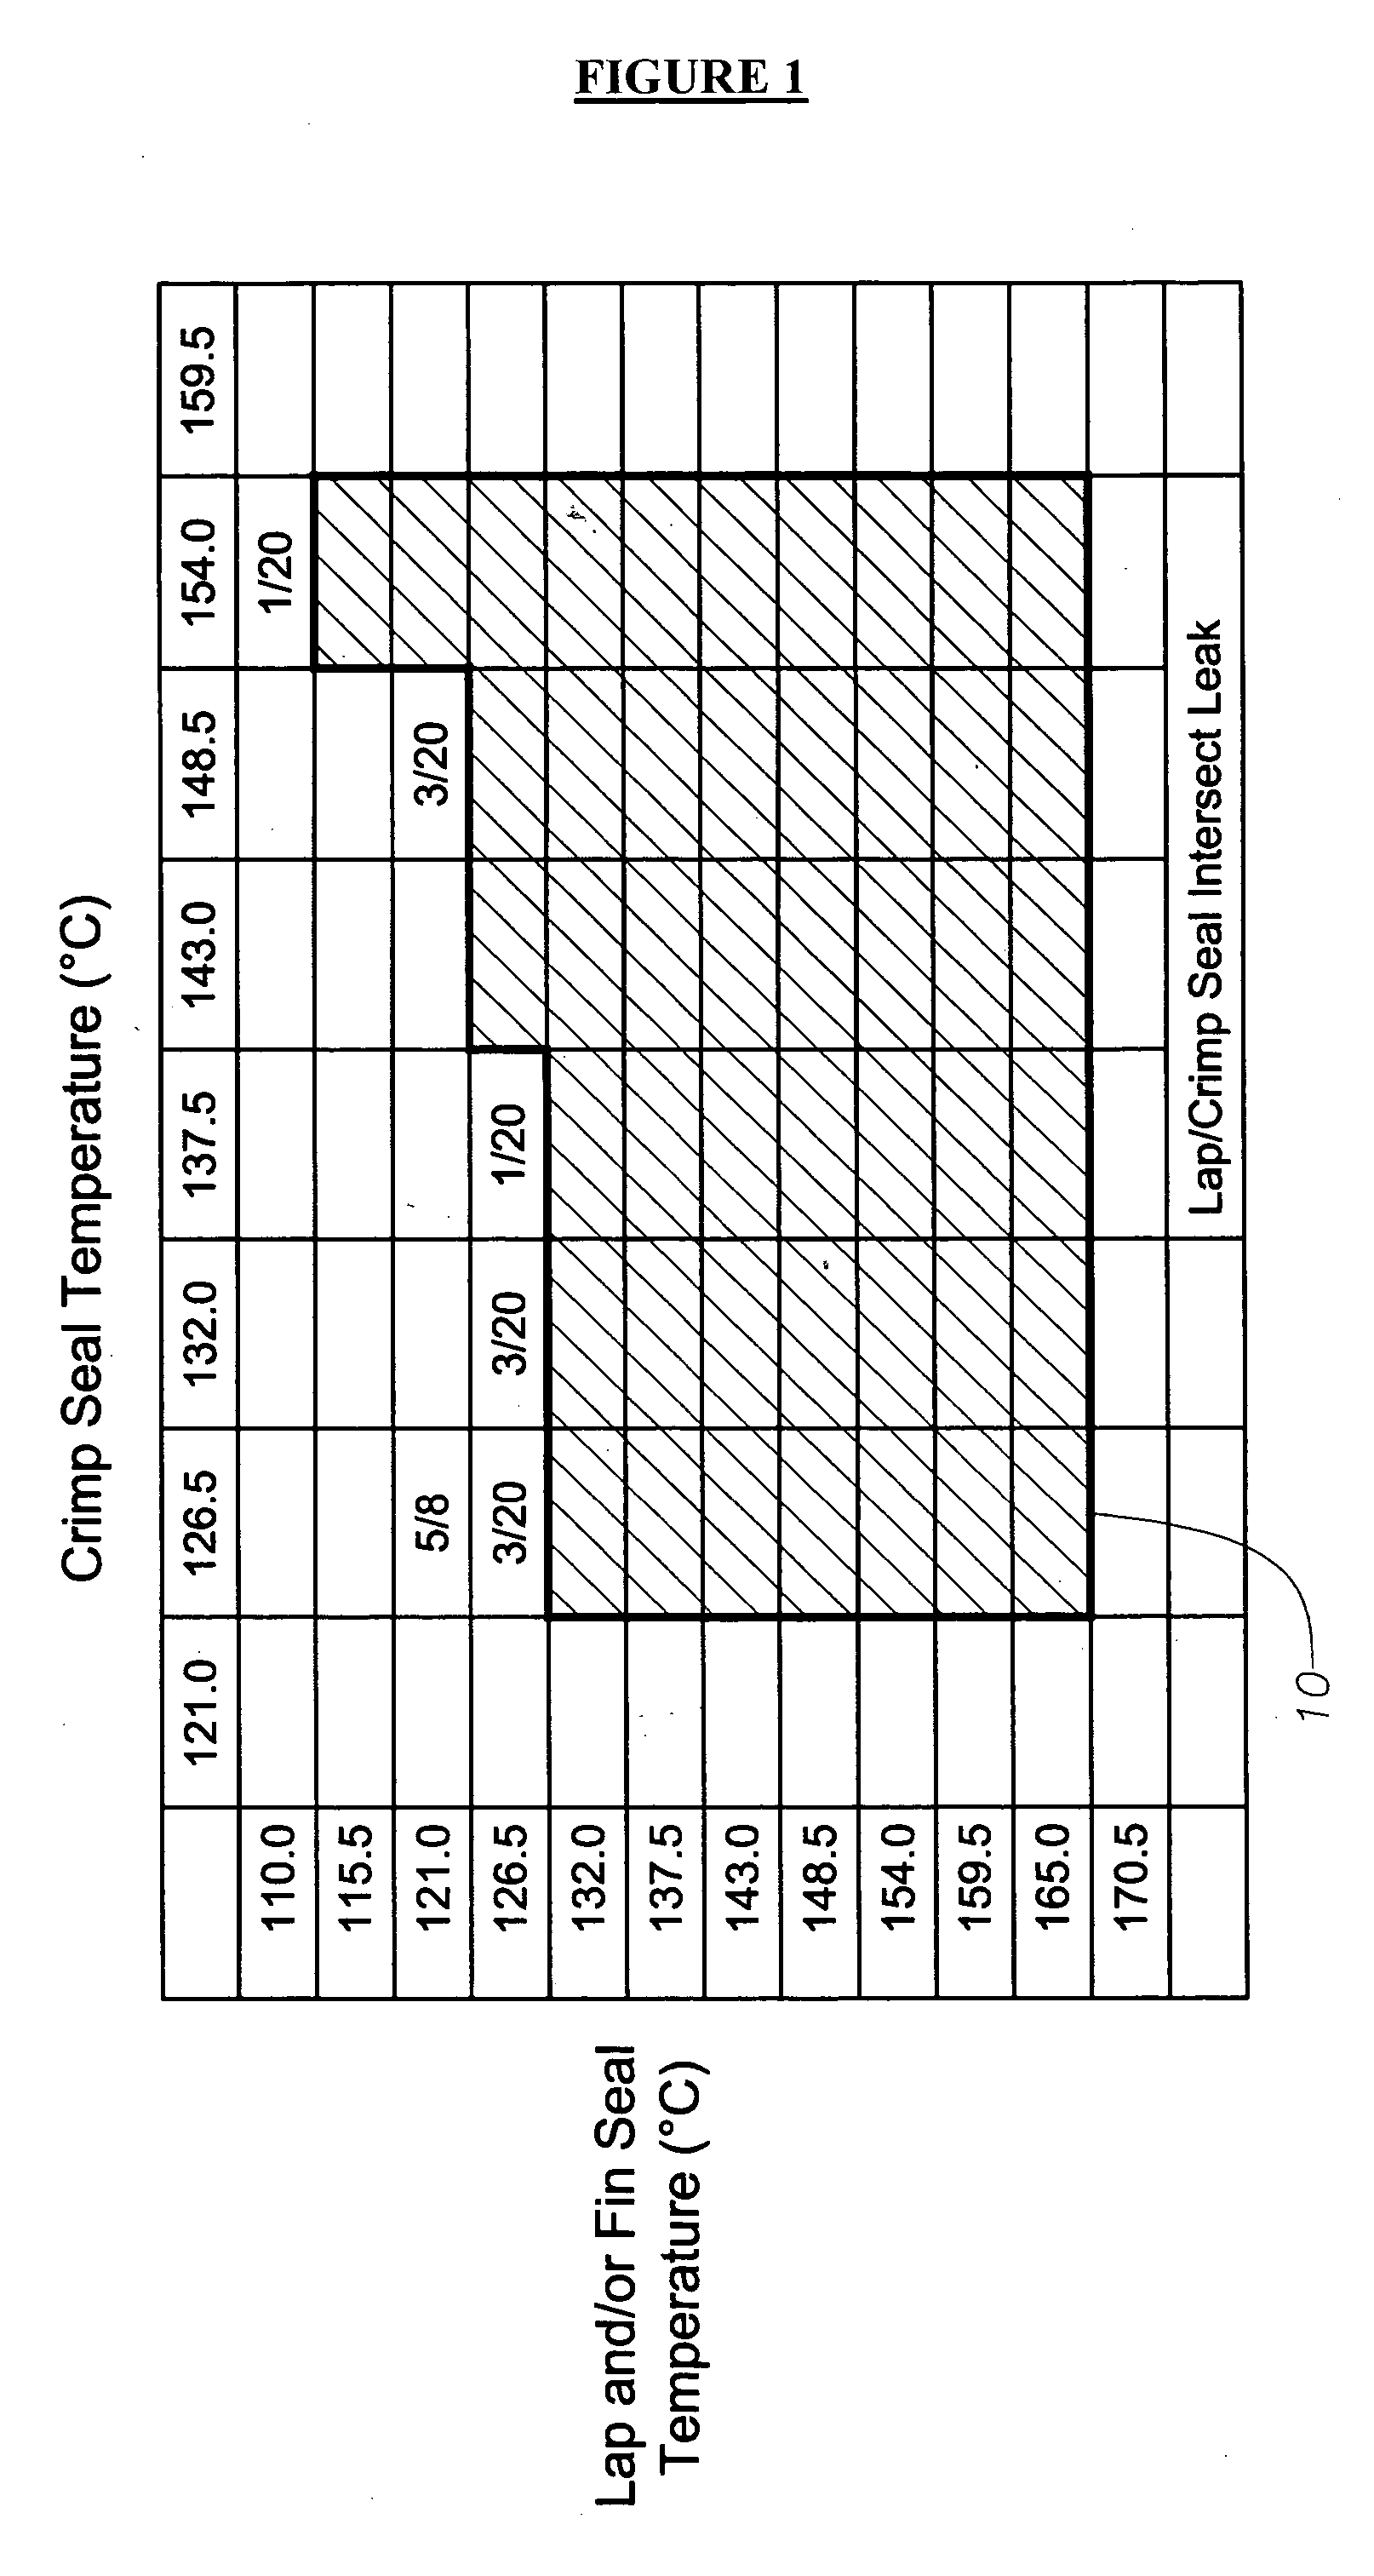 Polymer films and methods of producing and using such films